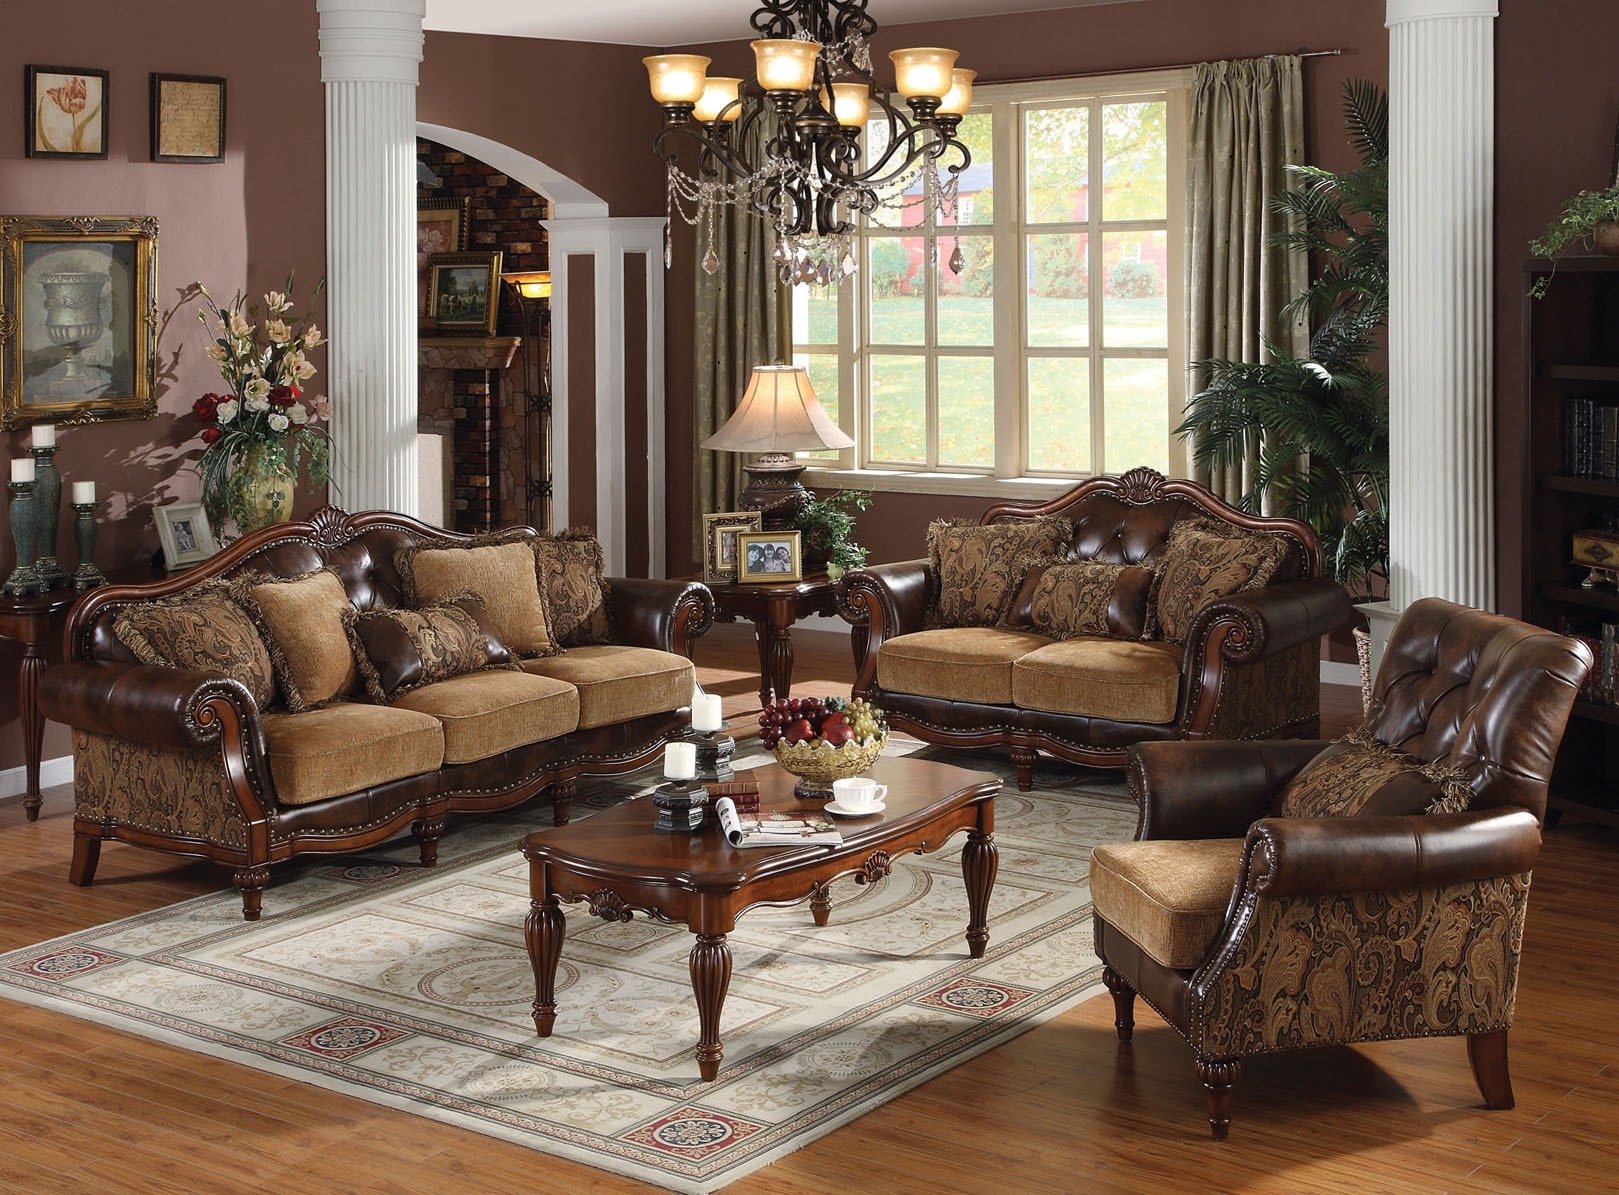 classic style living room